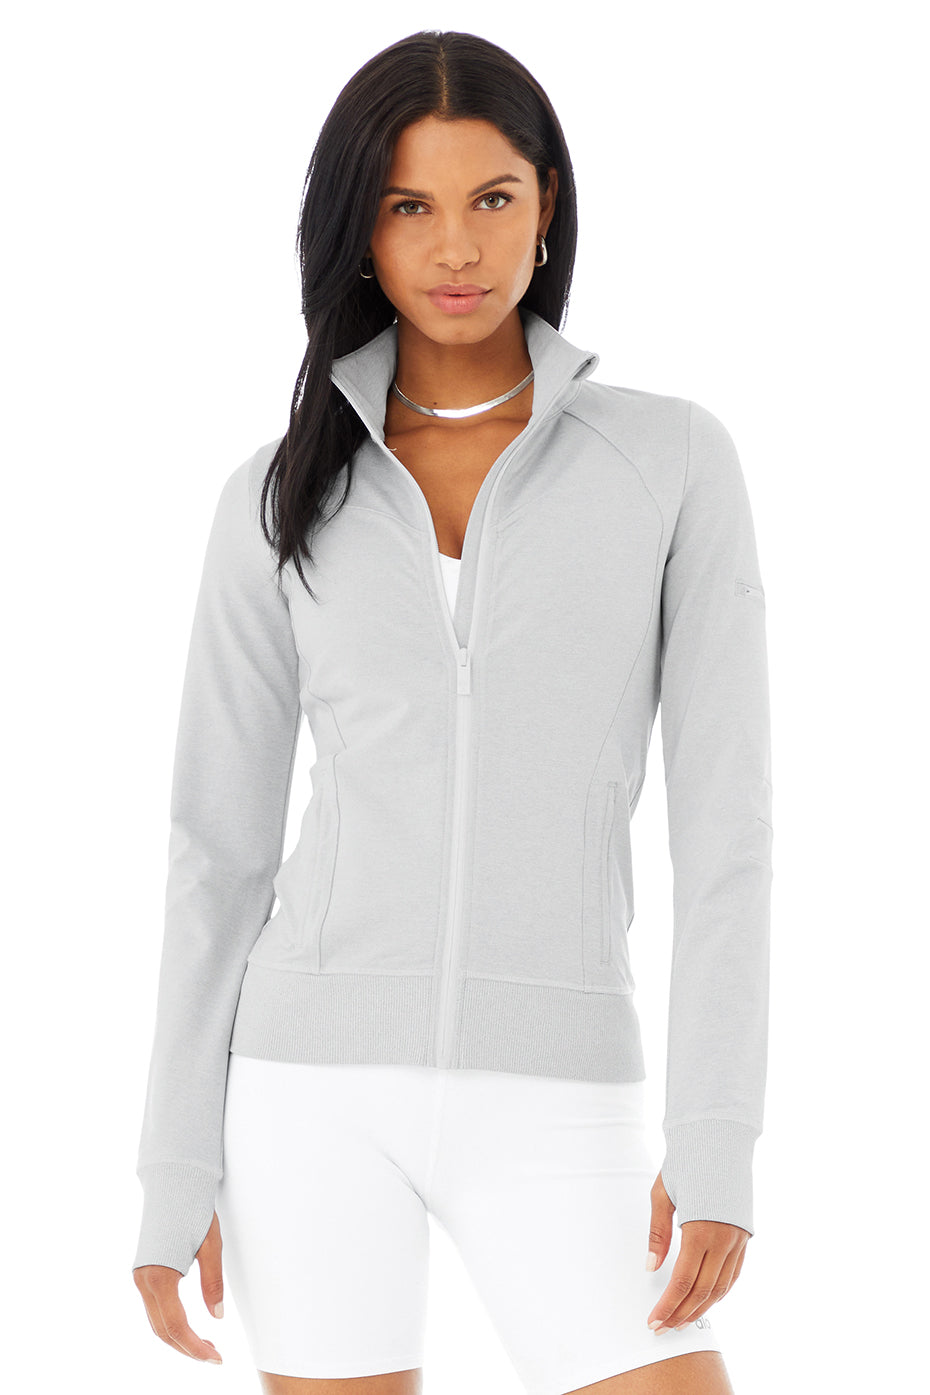 Contour Jacket in Athletic Heather Grey by Alo Yoga